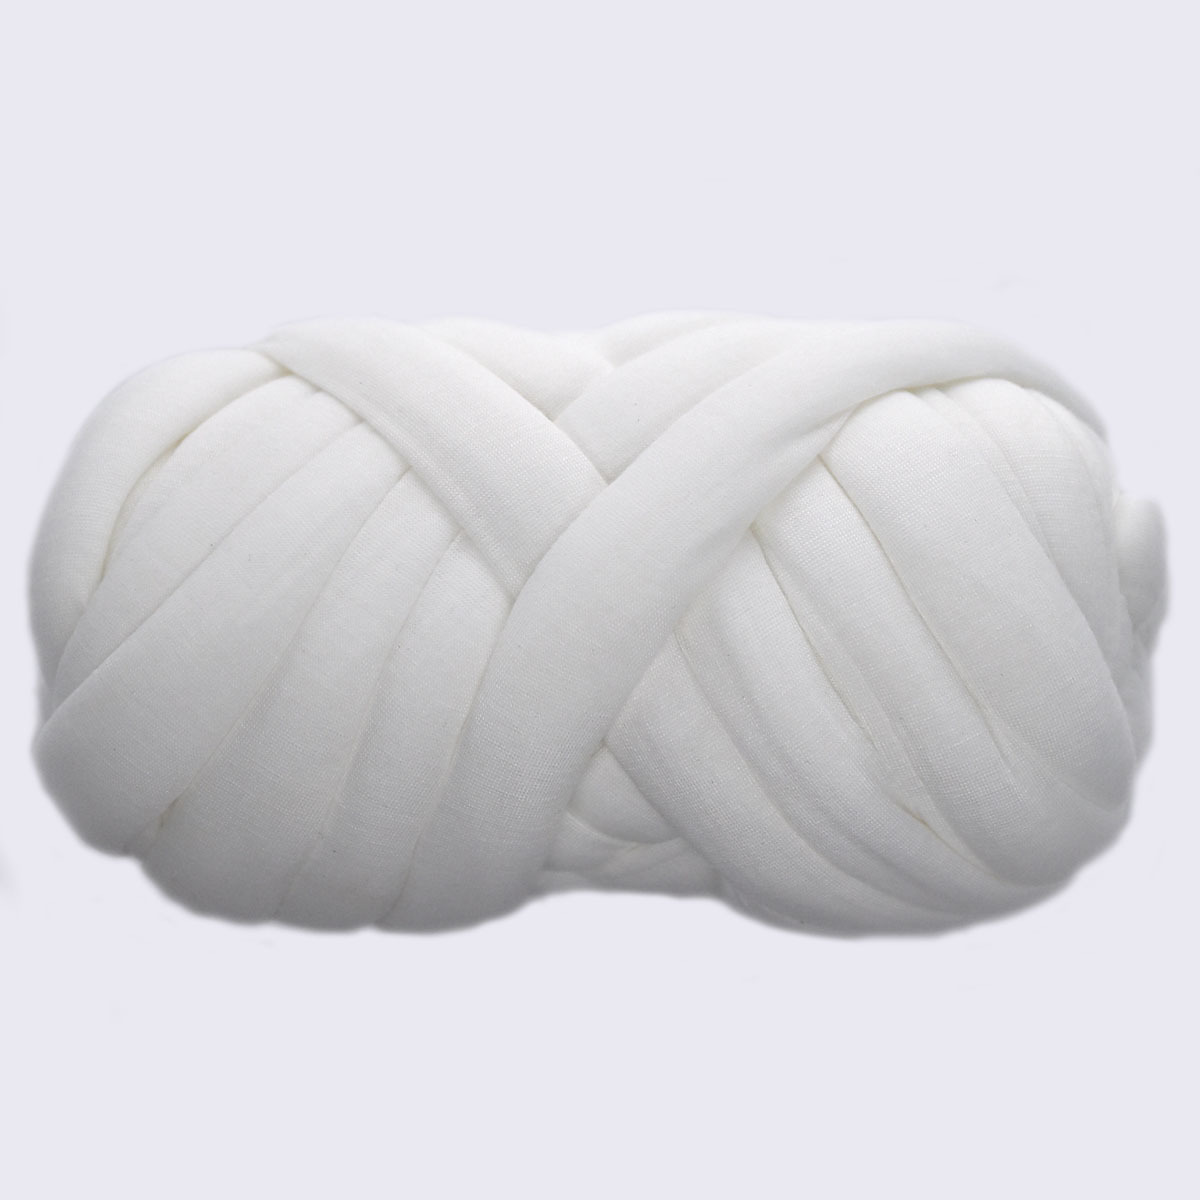 Super Thick Chunky Wool Yarn For Knitting, Crochet, Carpet, Hats Super Bulky  Arm Roving And Chunky Knit Throw Blanket Making 197T From Tobiass, $14.58